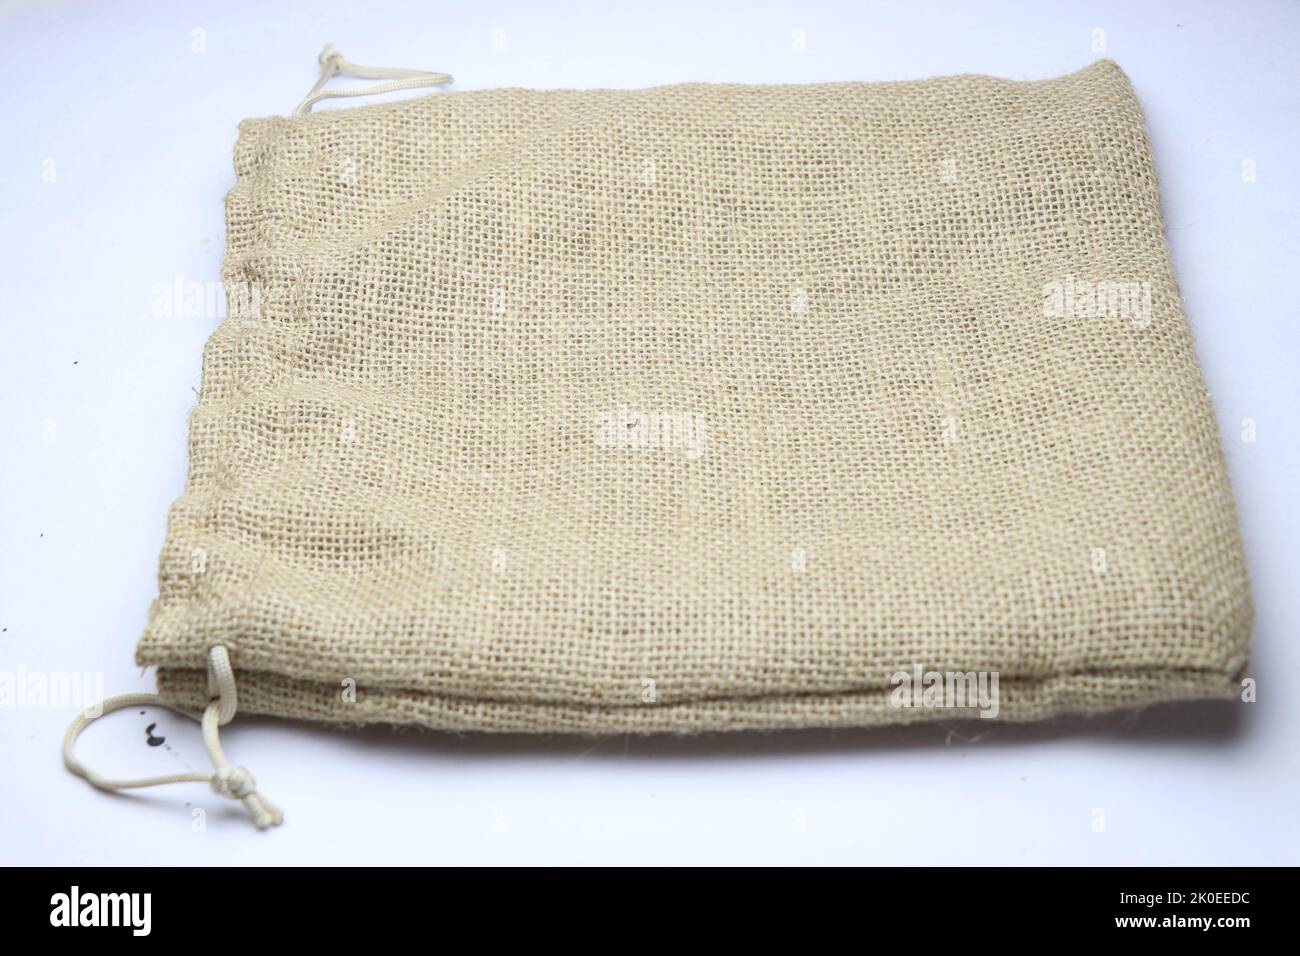 A small jute bag made from natural fibers and completely environment-friendly used for packing gifts kept on a white background Stock Photo